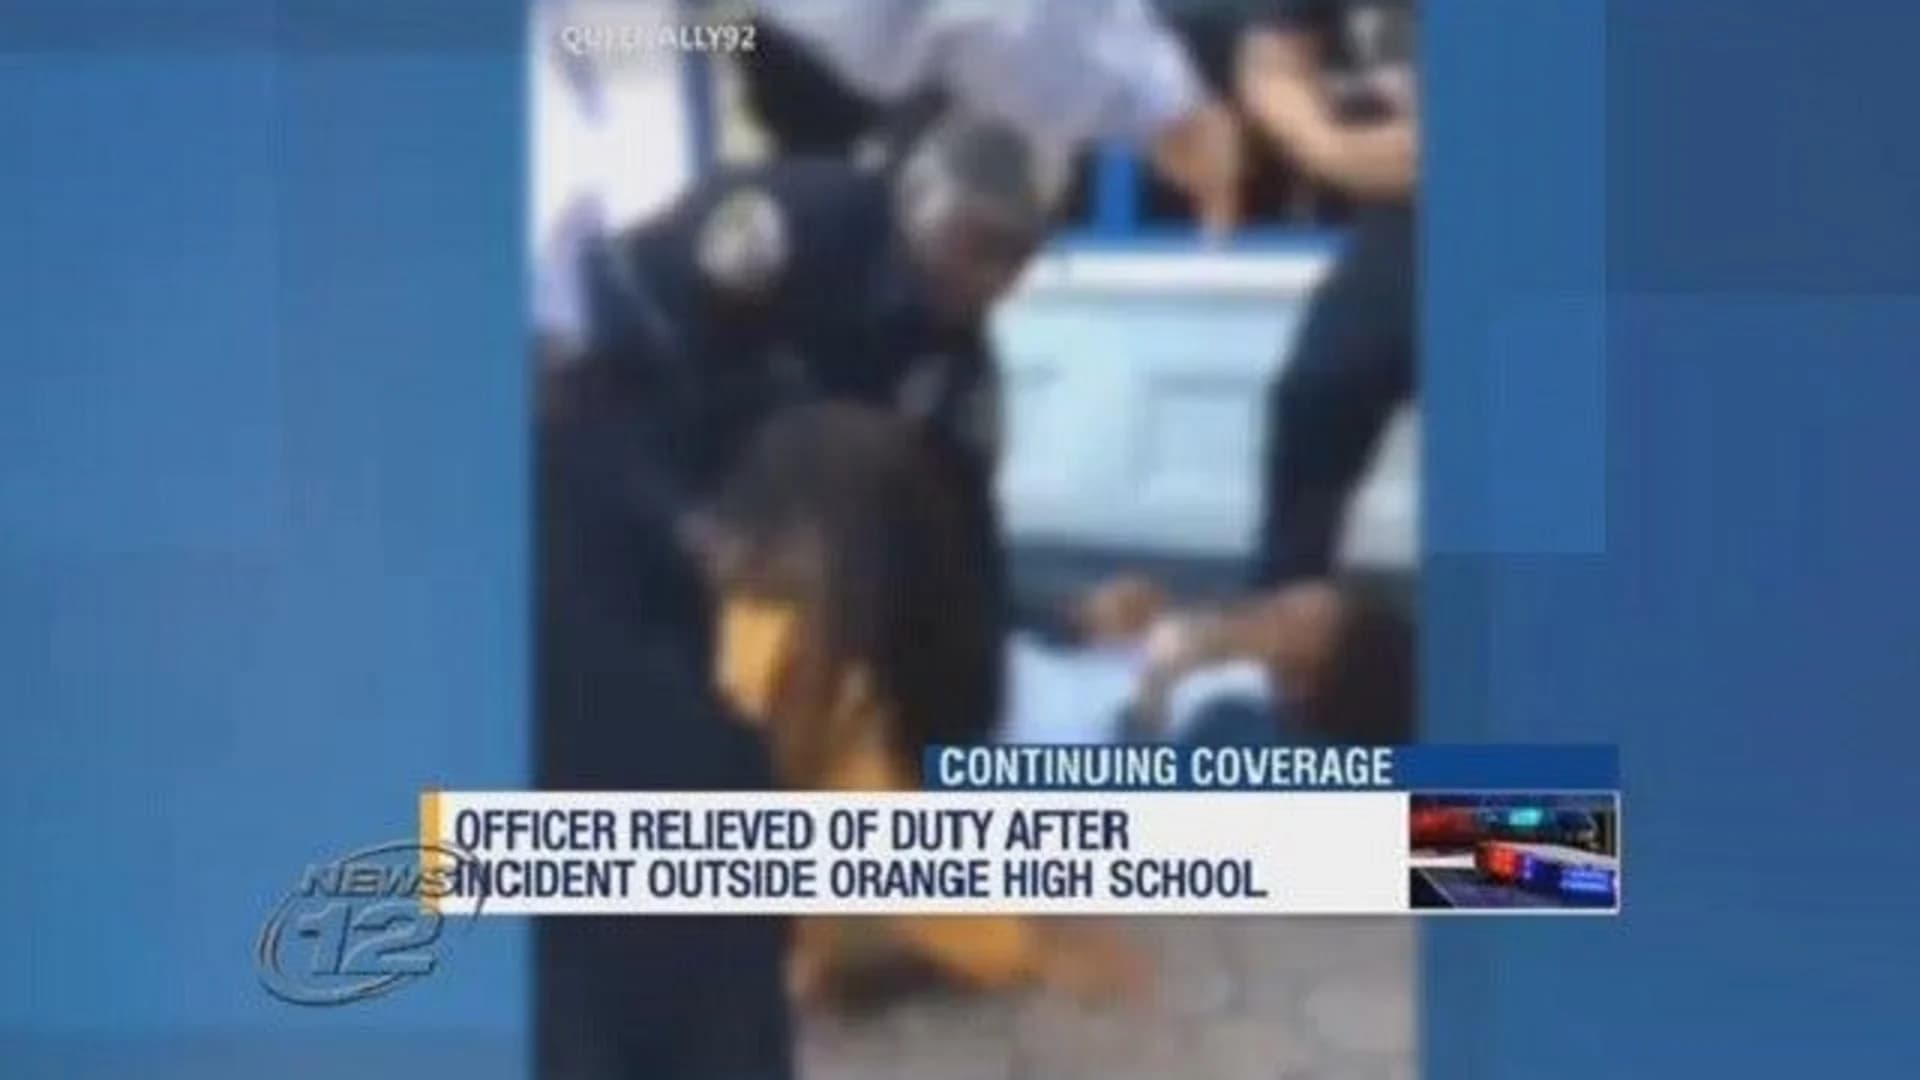 Officer relieved of duty following altercation outside Orange HS